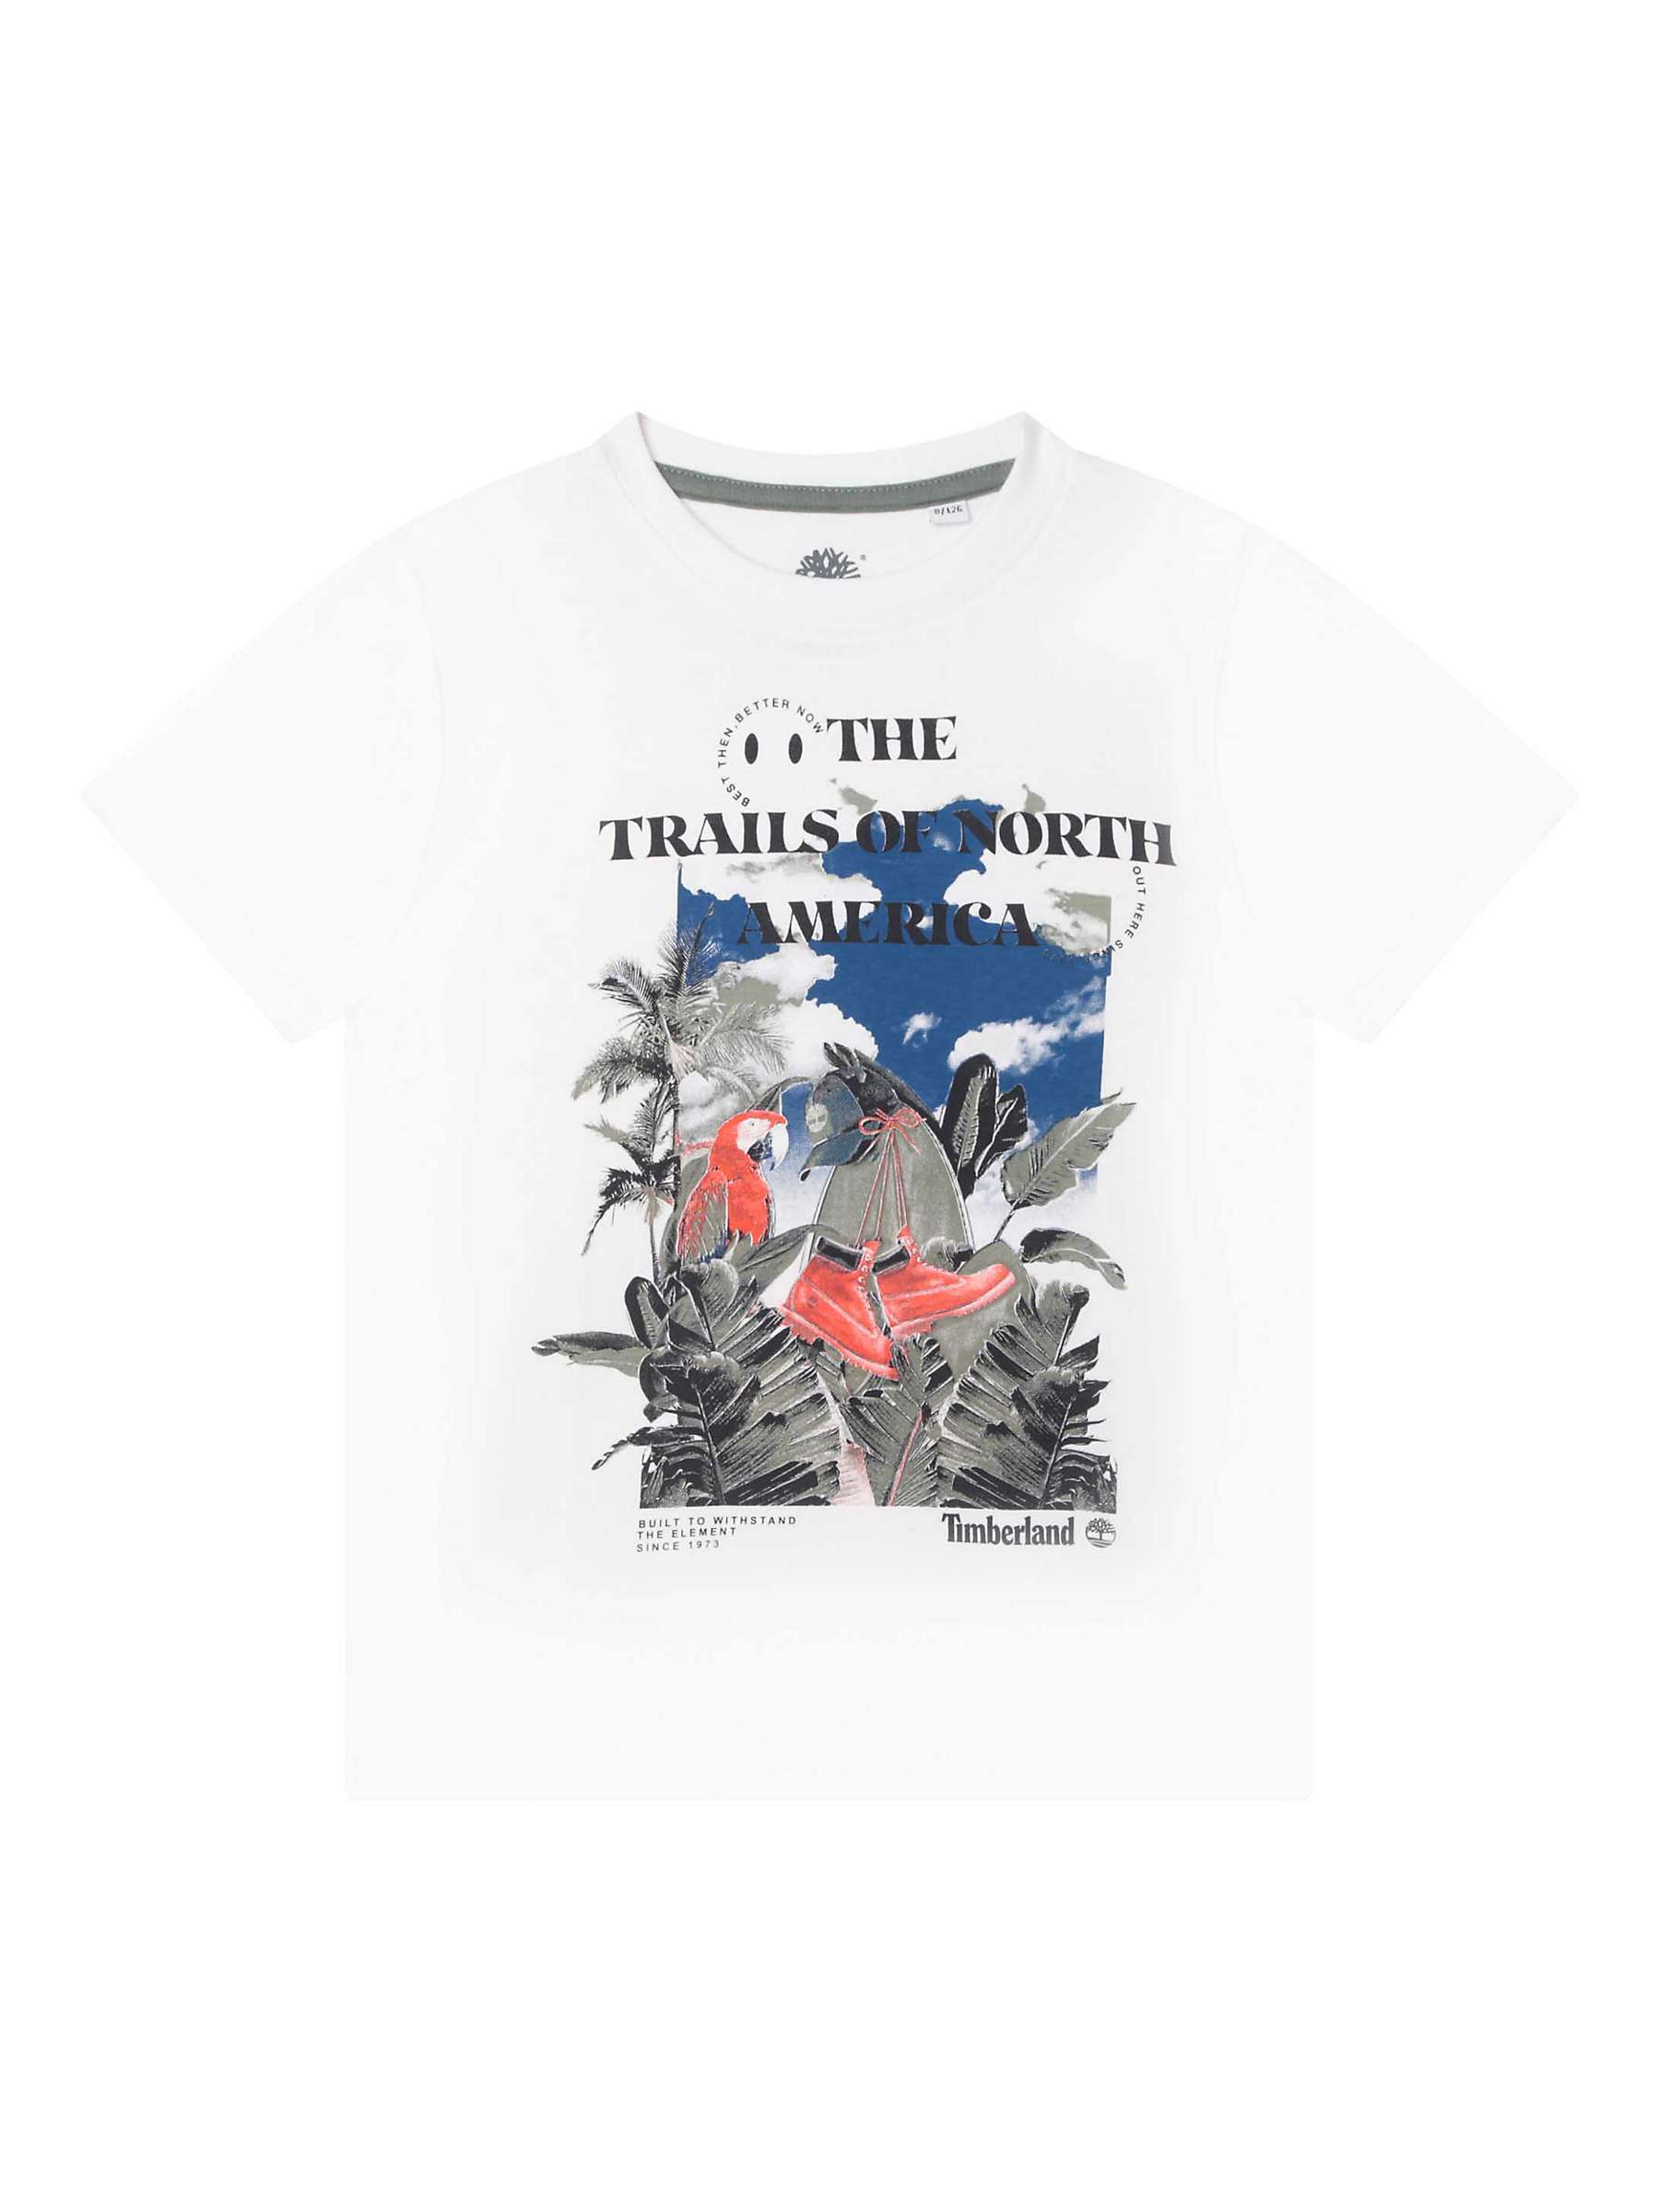 Timberland Kids' The Trails of North America T-Shirt, White at John ...